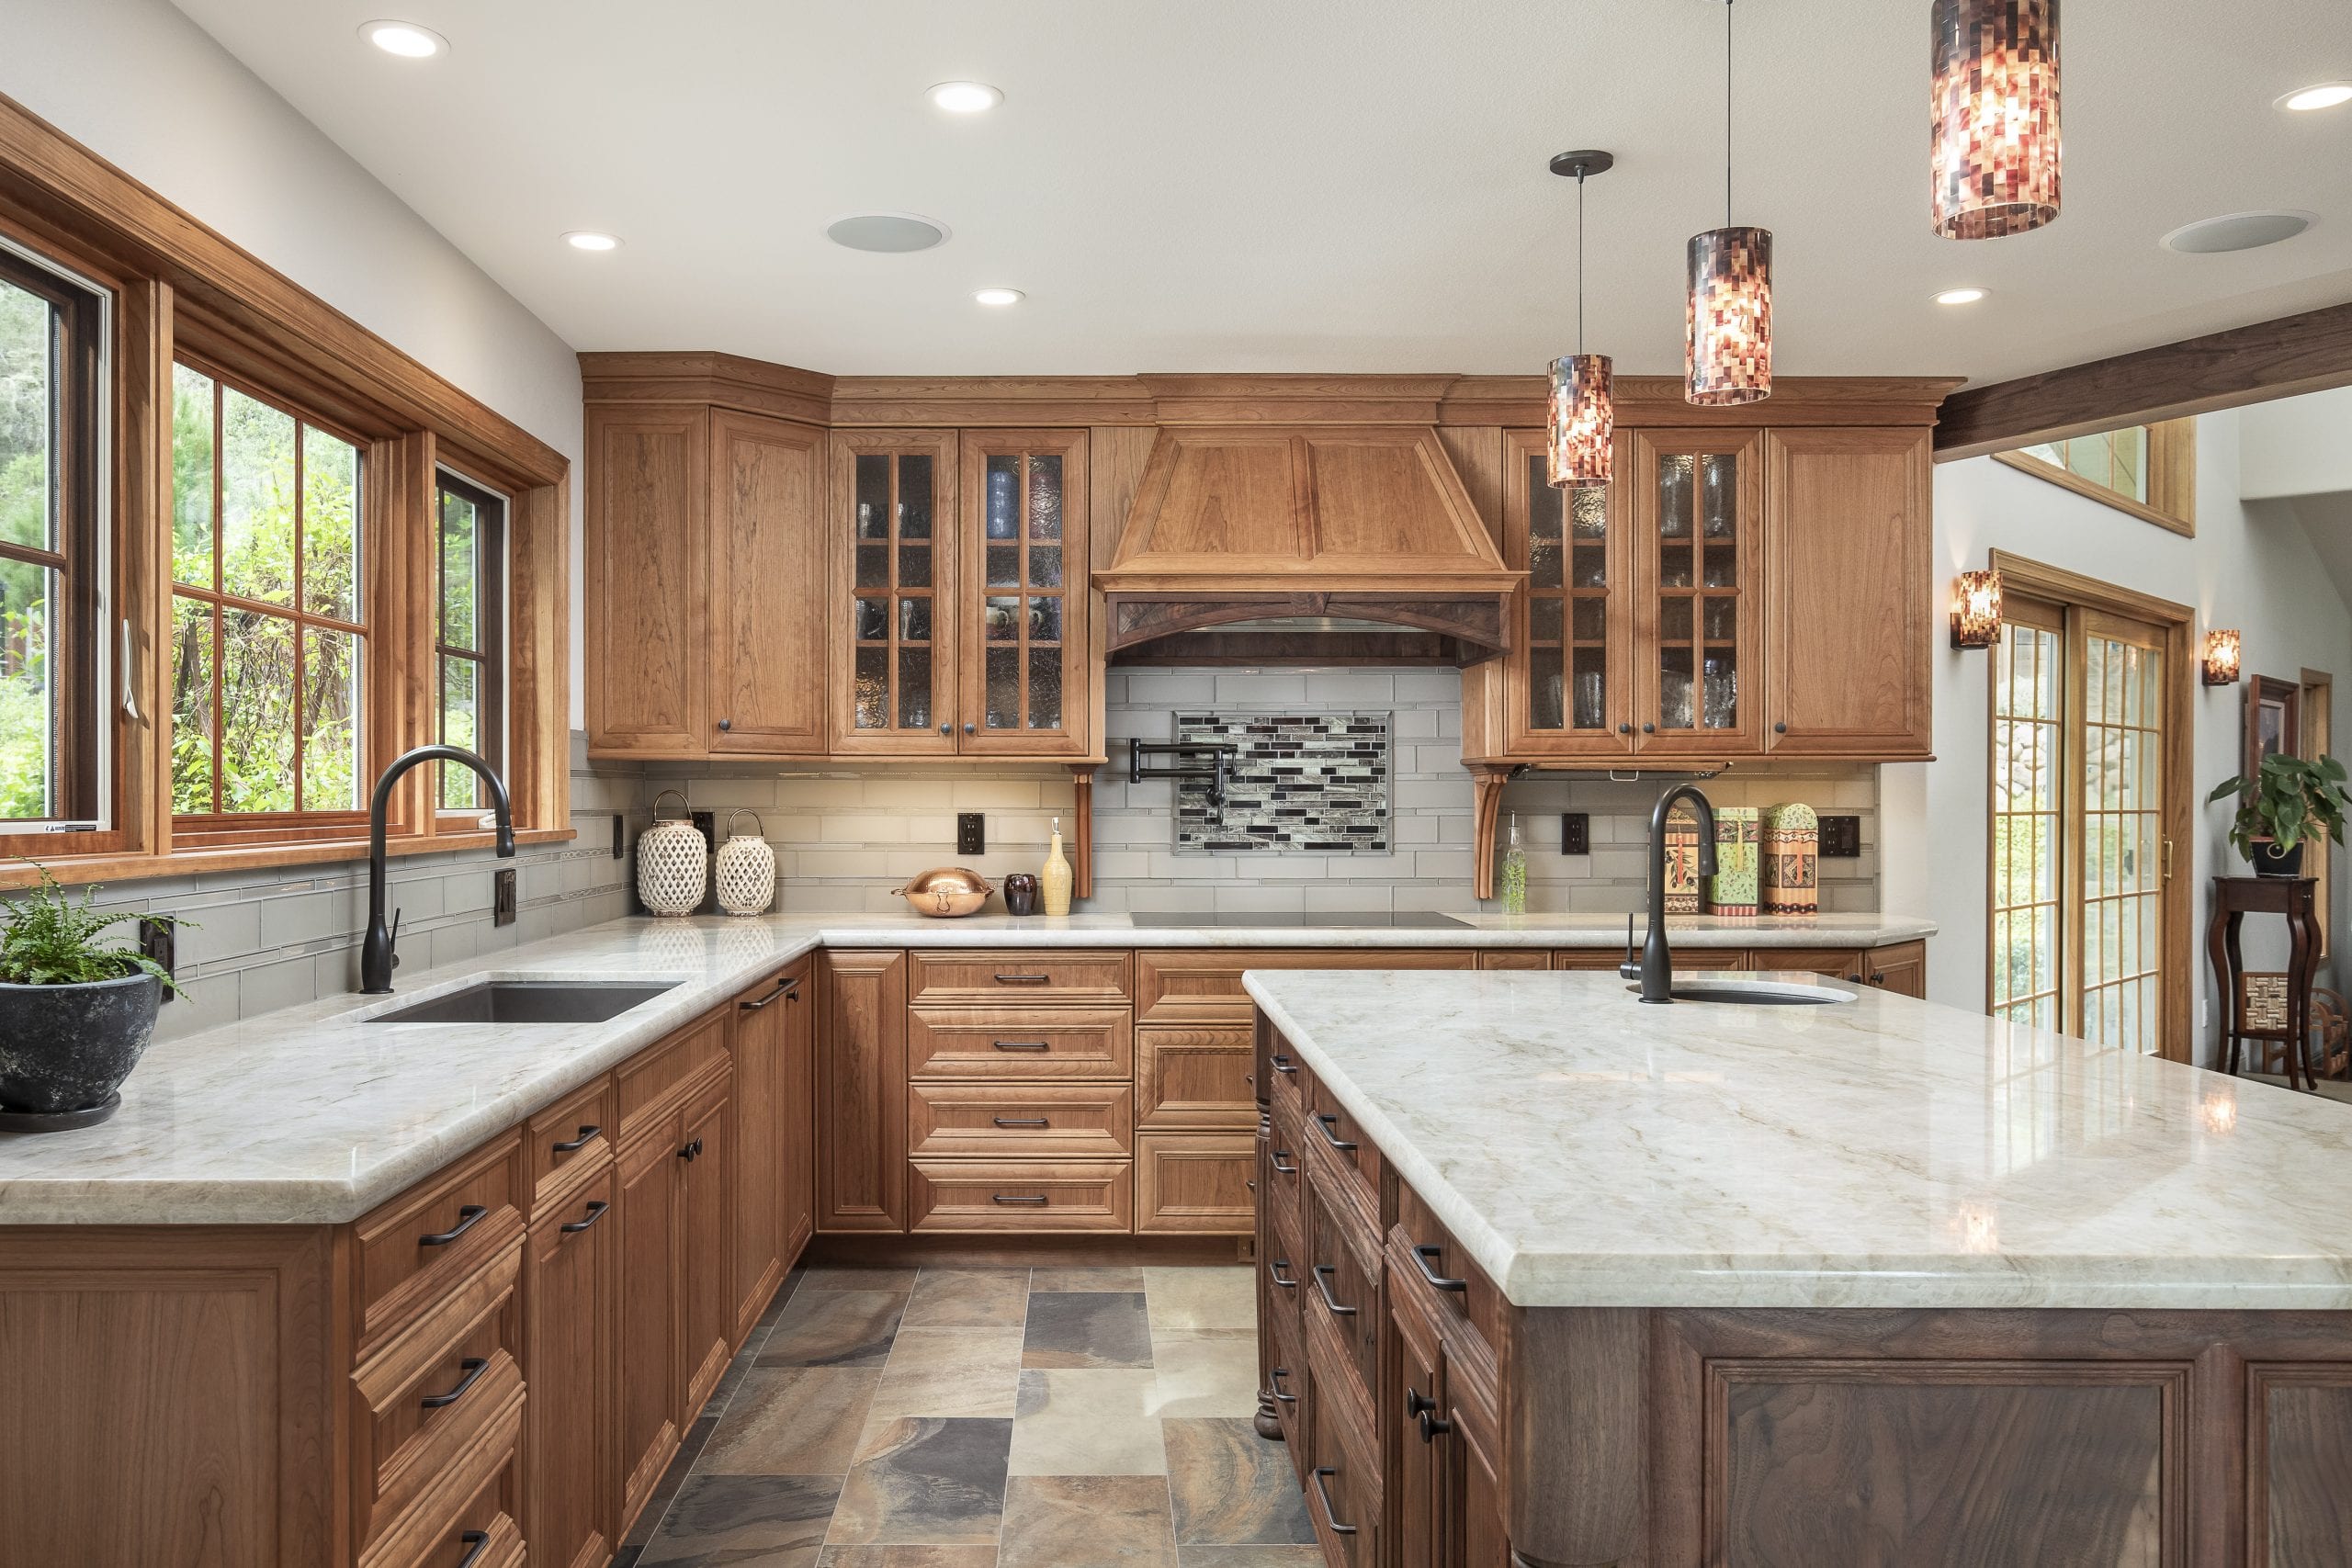 Newly remodeled kitchen with white marbled countertops and wooden cabinets